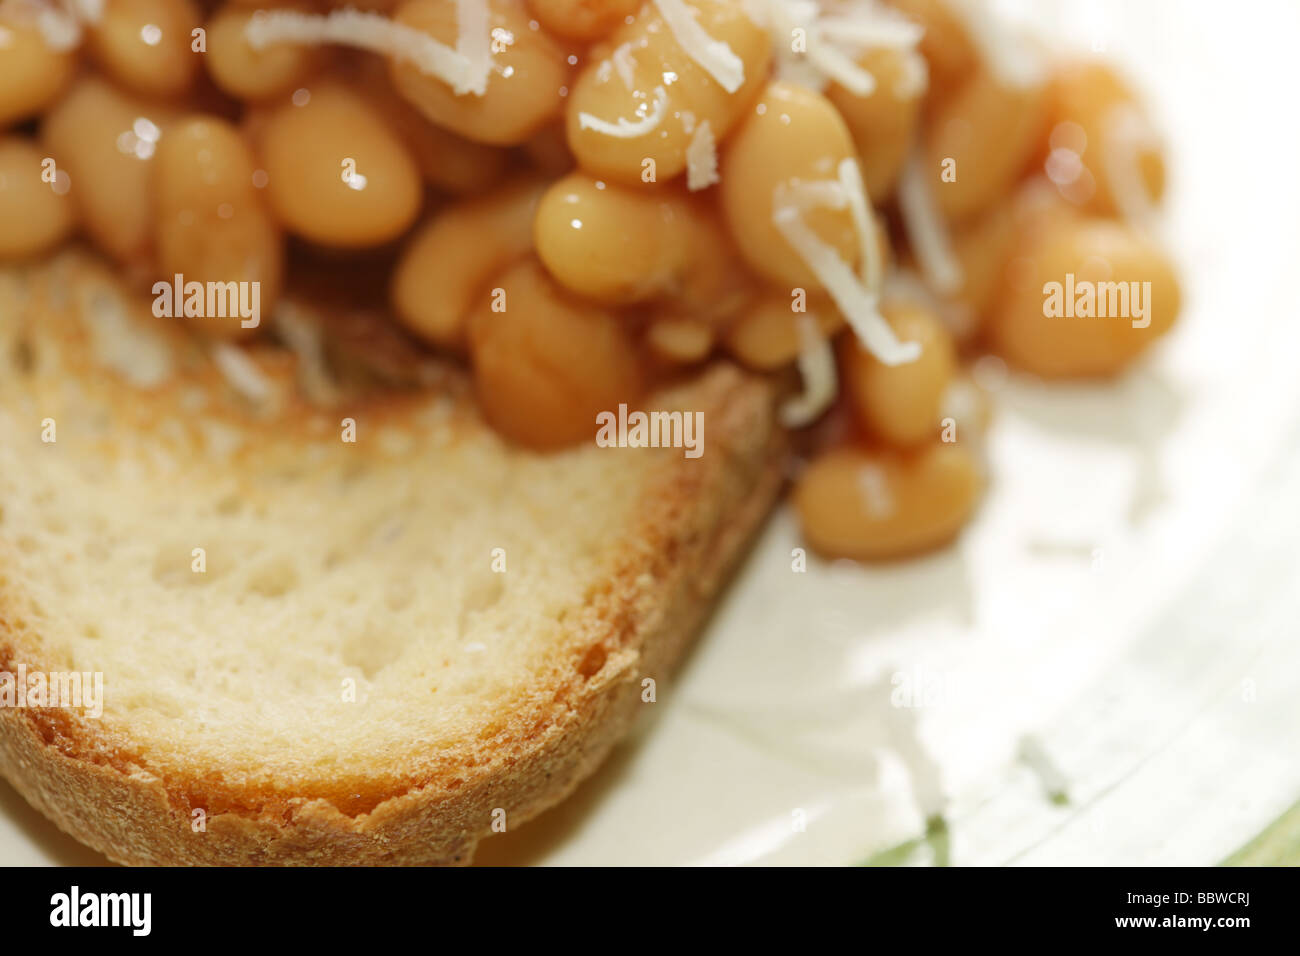 Baked Beans and Parmesan Cheese on Bruschetta Stock Photo